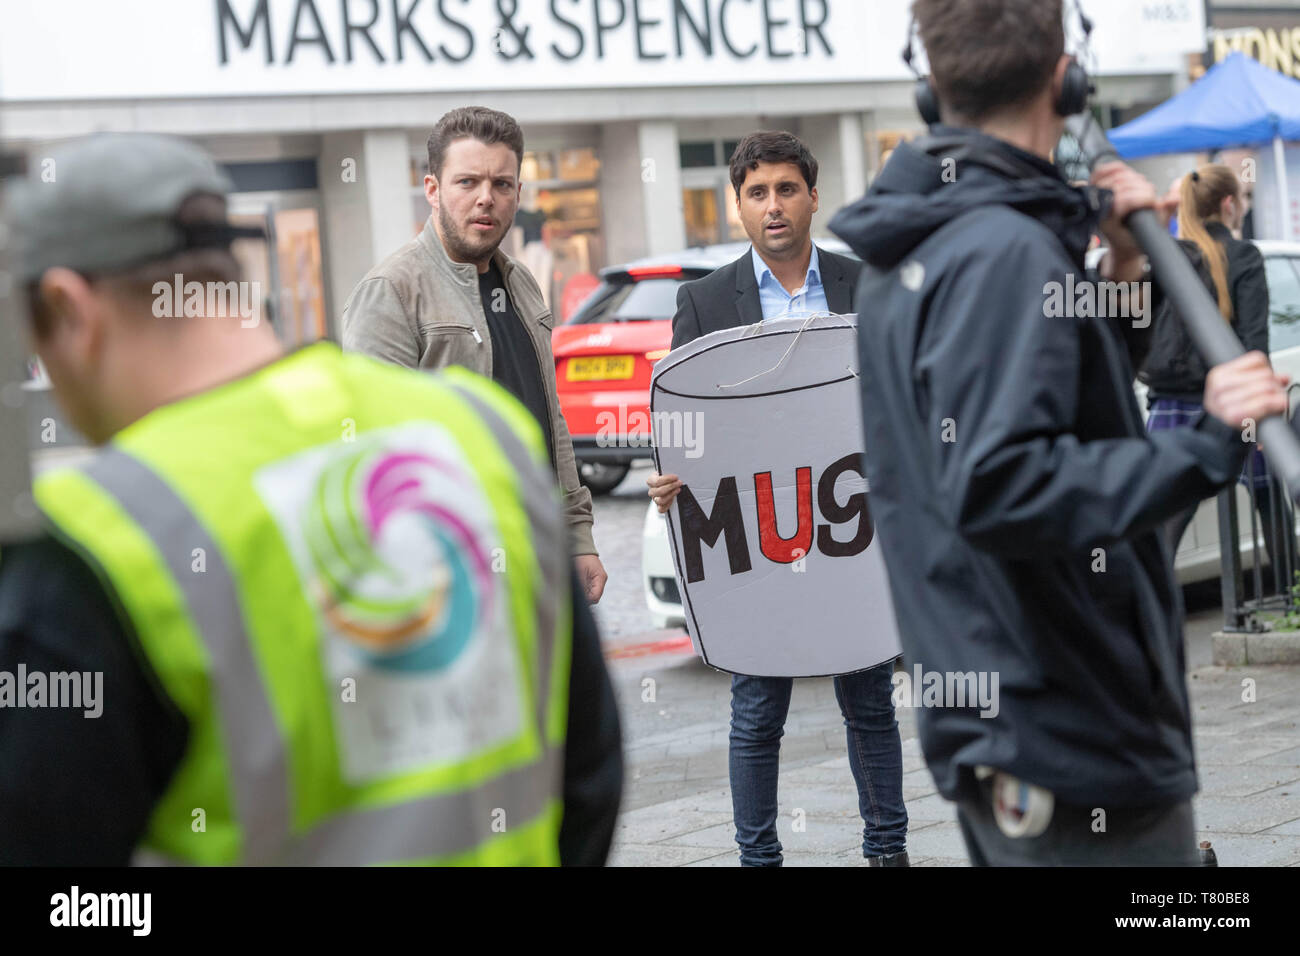 Brentwood Essex 9th May 2019 Filming of the latest episode of The Only Way is Essex TOWIE in Brentwood High Street    Credit Ian Davidson/Alamy Live News Stock Photo